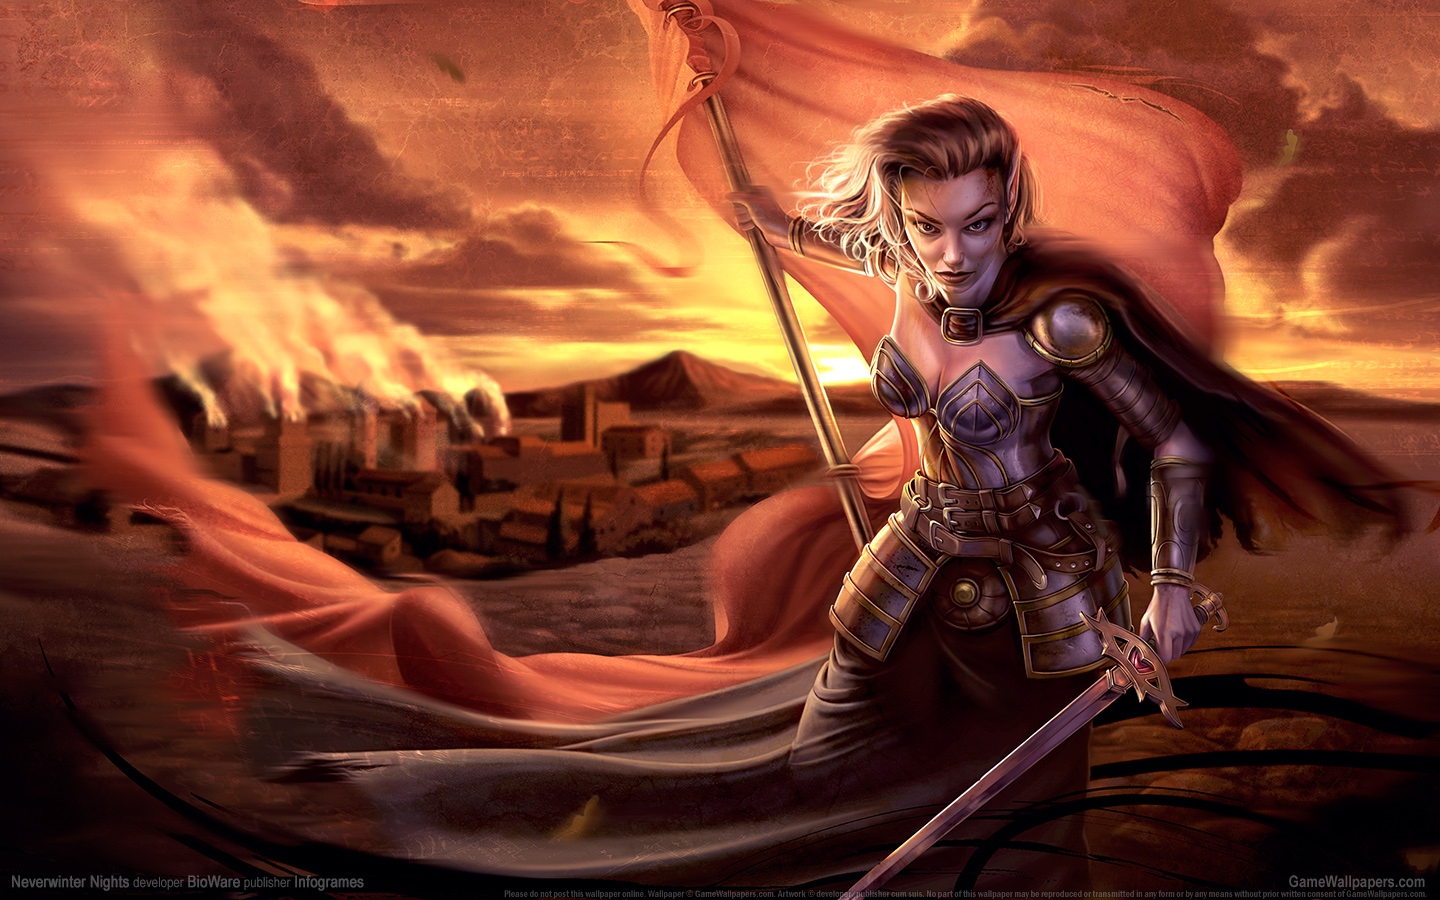 Neverwinter Nights 1440x900 wallpaper or background 11